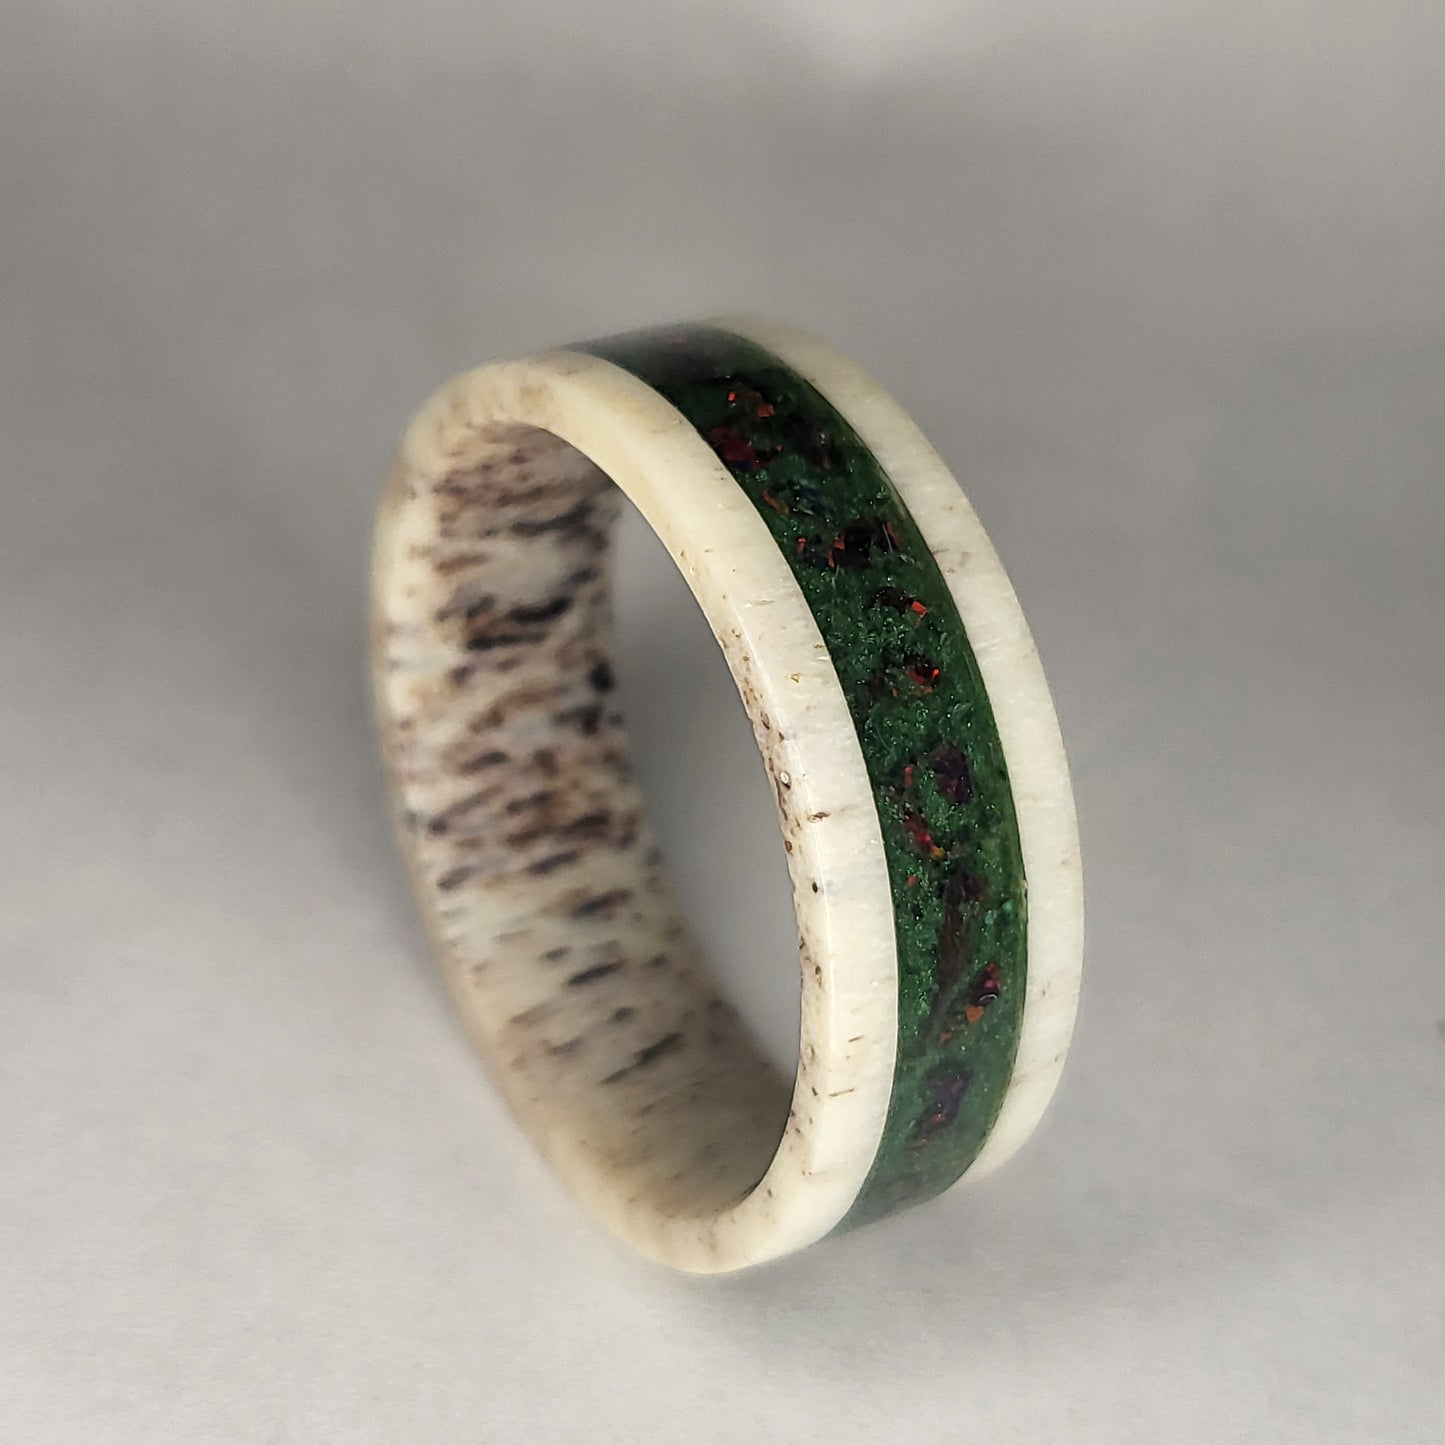 Deer Antler Band, Fire Opal with Malachite Background